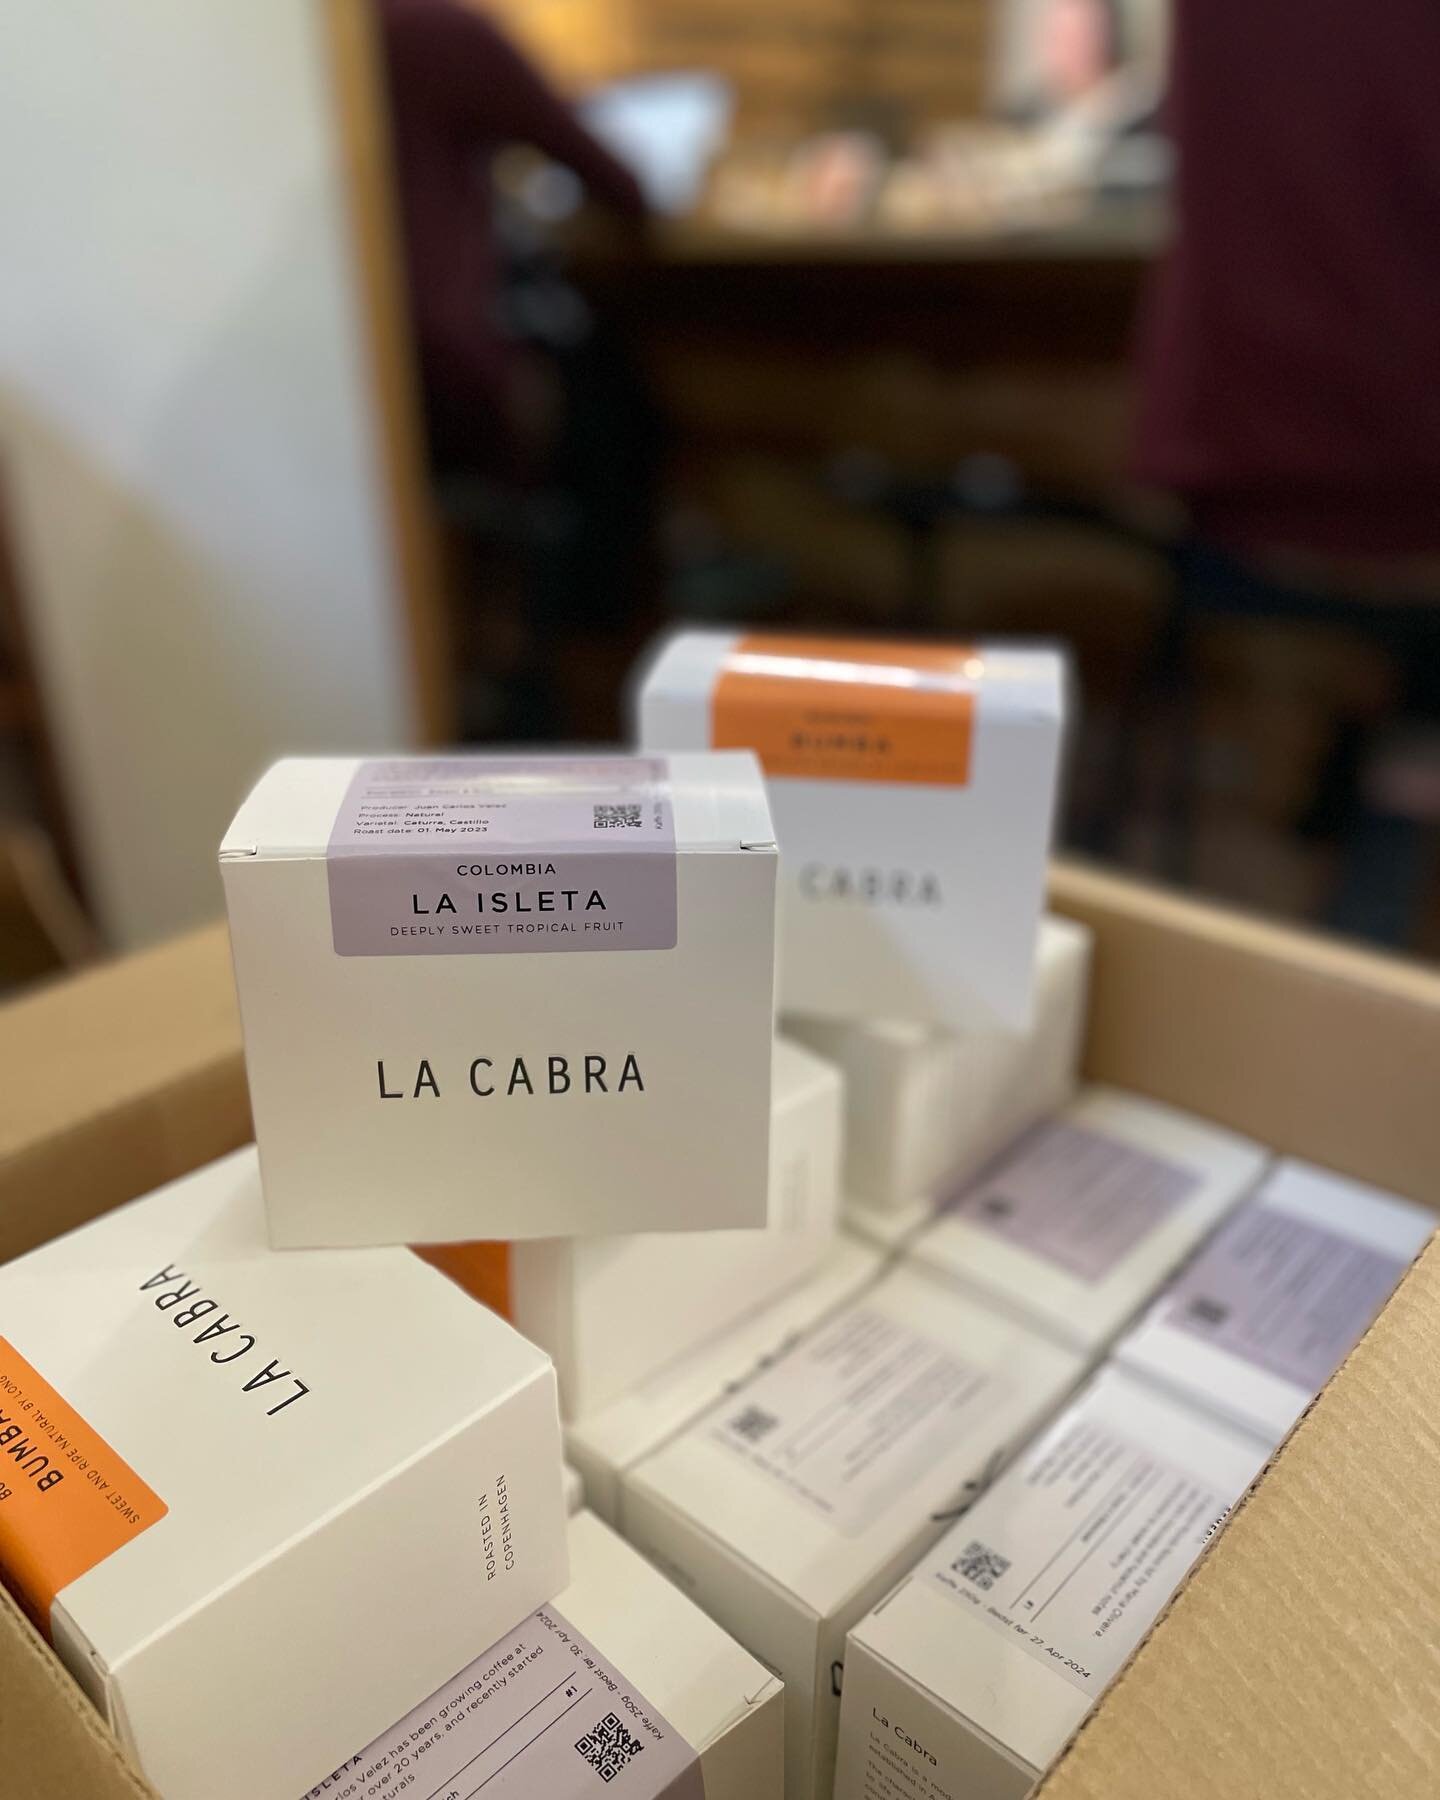 Danish coffee roasters @lacabracoffee are one of the most exciting coffee companies in Scandinavia. We have a range of their coffees on sale at Oslo Kaffebar right now!
.
.
.
.
.

#specialtycoffee #coffeeshop #coffeelover #coffeeshopvibes #espresso #